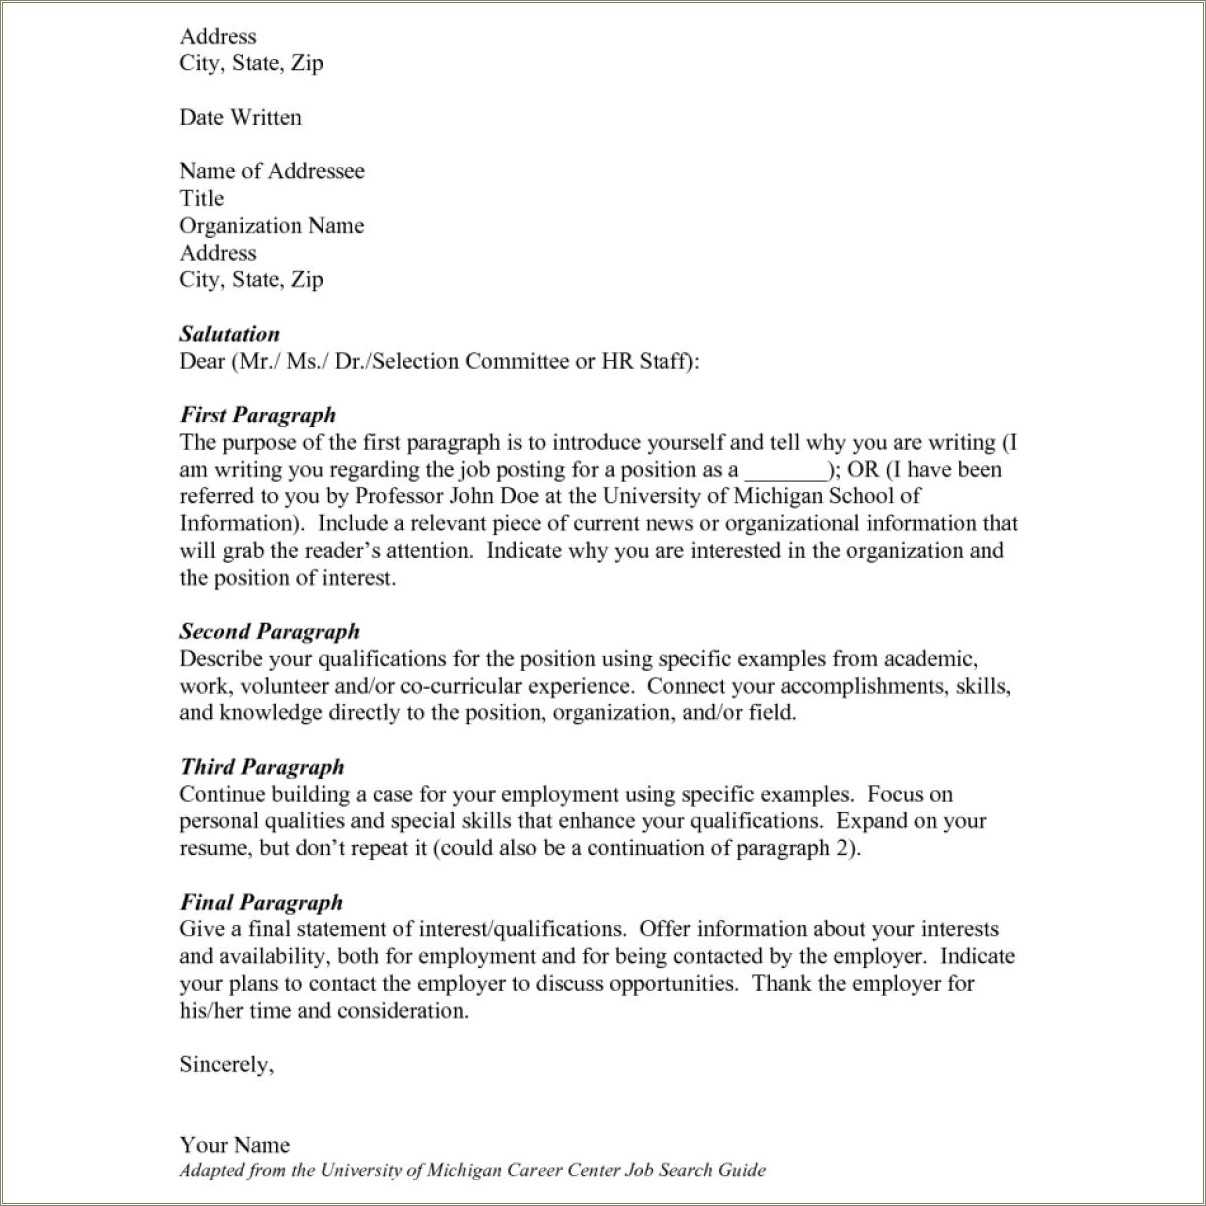 Address Cover Letter To Unknown Recipient Resume - Resume Example Gallery